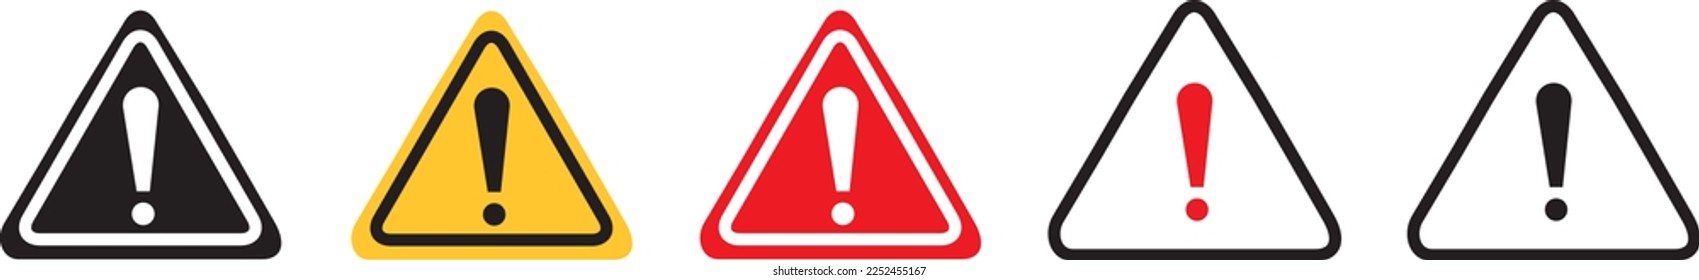 Caution alarm set, danger sign collection, attention vector icon, yellow, red and black fatal error message element, exclamation mark of warning attention icon